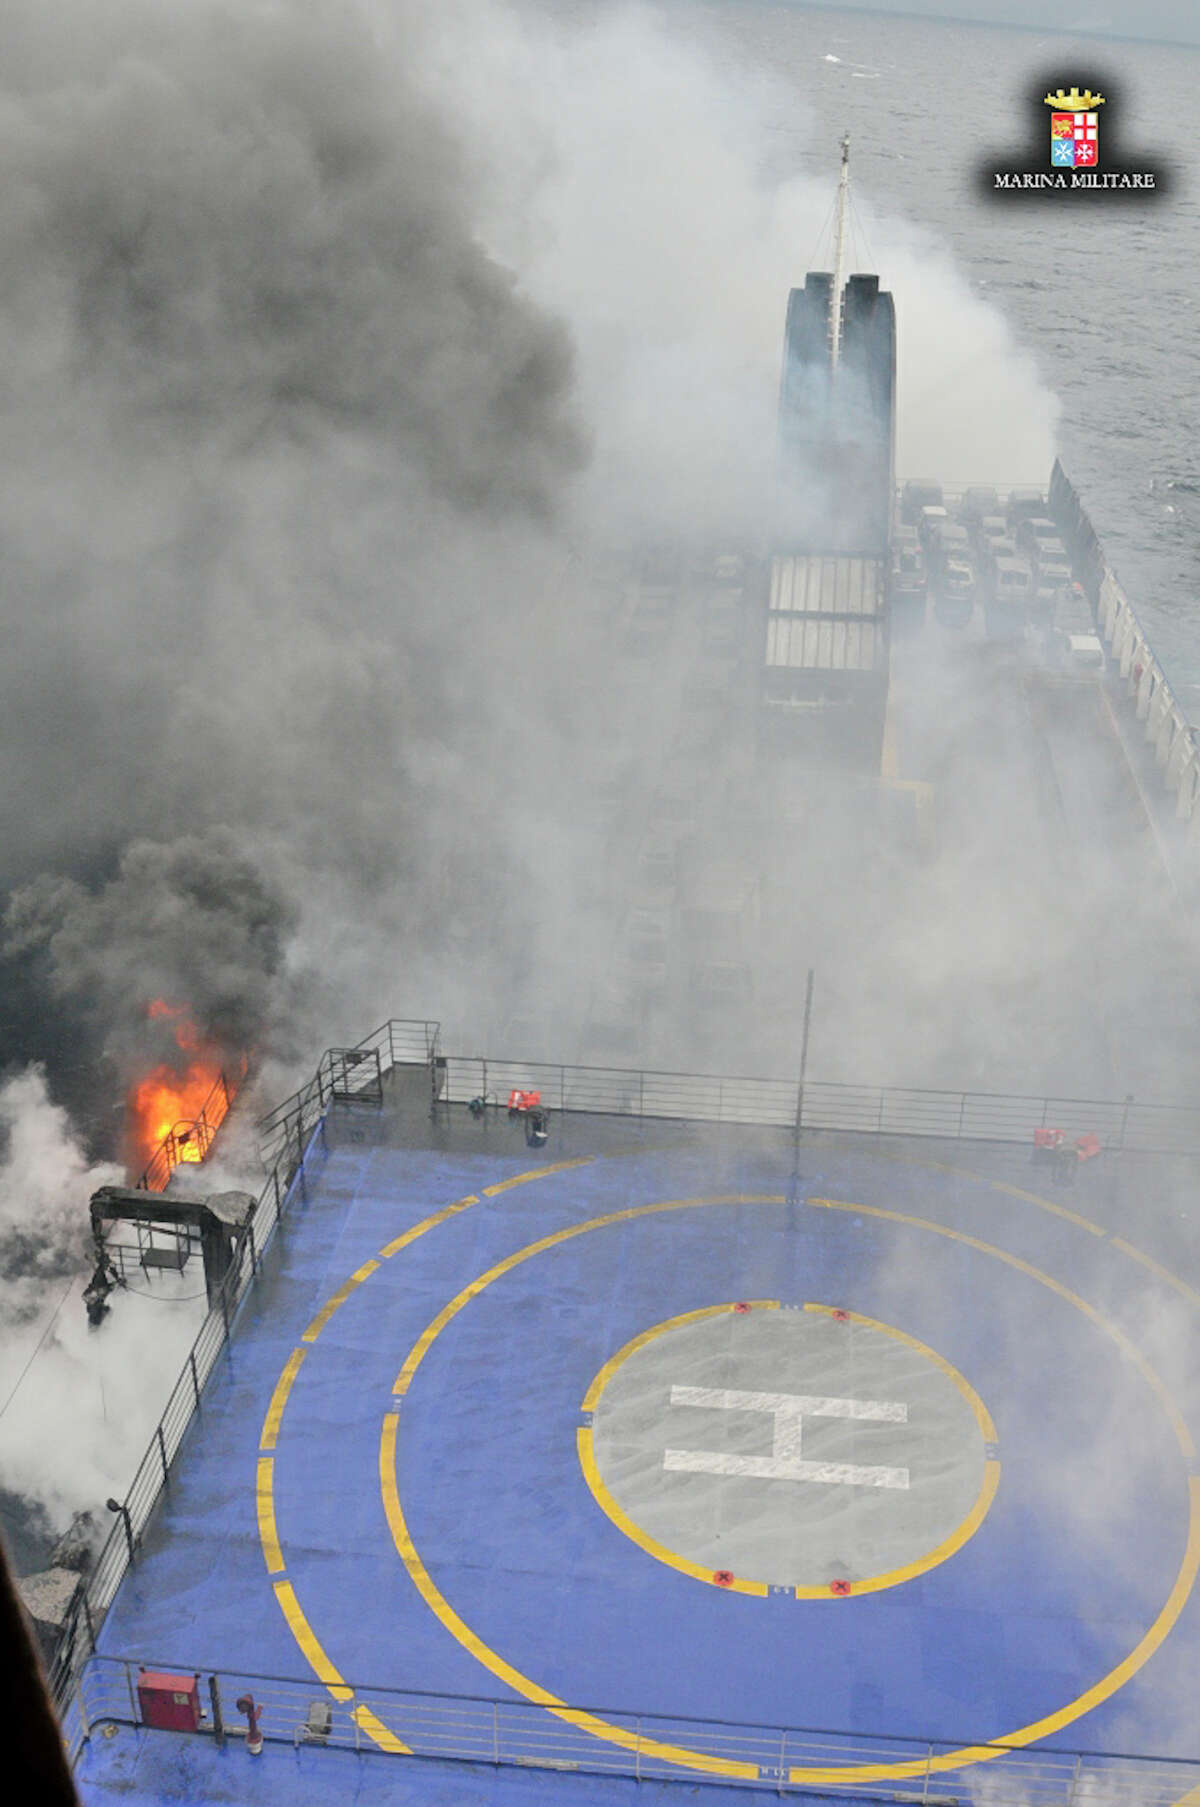 In this image released by the Italian Navy, smoke billows from the Italian-flagged ferry Norman Atlantic that caught fire in the Adriatic Sea, Sunday, Dec. 28, 2014. Italian and Greek rescue crews battled gale-force winds and massive waves as they struggled Sunday to evacuate hundreds of people from a ferry on fire and adrift in the channel between Italy and Albania. At least one person died and two were injured. The fire broke out before dawn Sunday on a car deck of the Italian-flagged Norman Atlantic, traveling from the western Greek port of Patras to the Italian port of Ancona on the Adriatic, with 422 passengers and 56 crew members on board.AP story: 1 dead, hundreds stranded in Greek ferry disaster